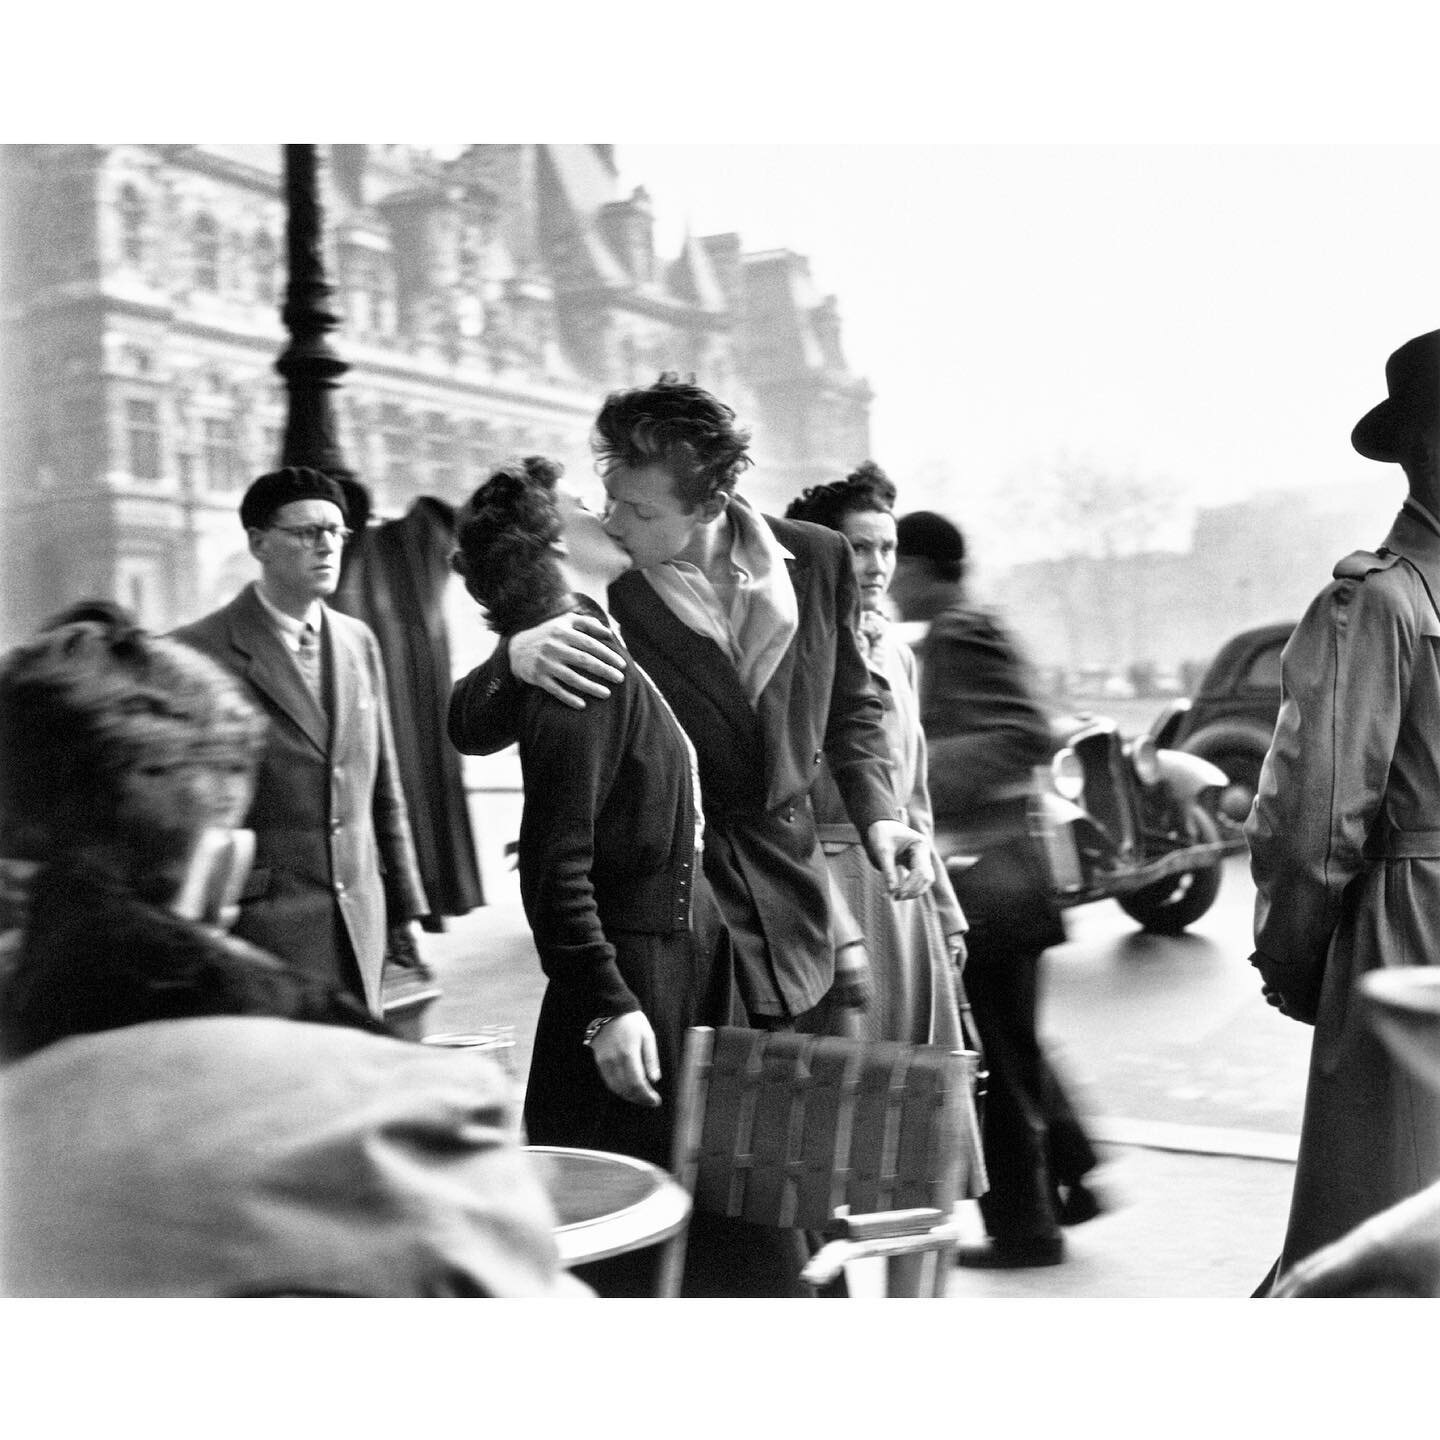 Another by Robert Doisneau. In 1950 Doisneau created this, his most recognizable work &ndash; Le Baiser de l'Hôtel de Ville (Kiss by the Hôtel de Ville), a photograph of a couple kissing in the busy streets of Paris, which became an internationally